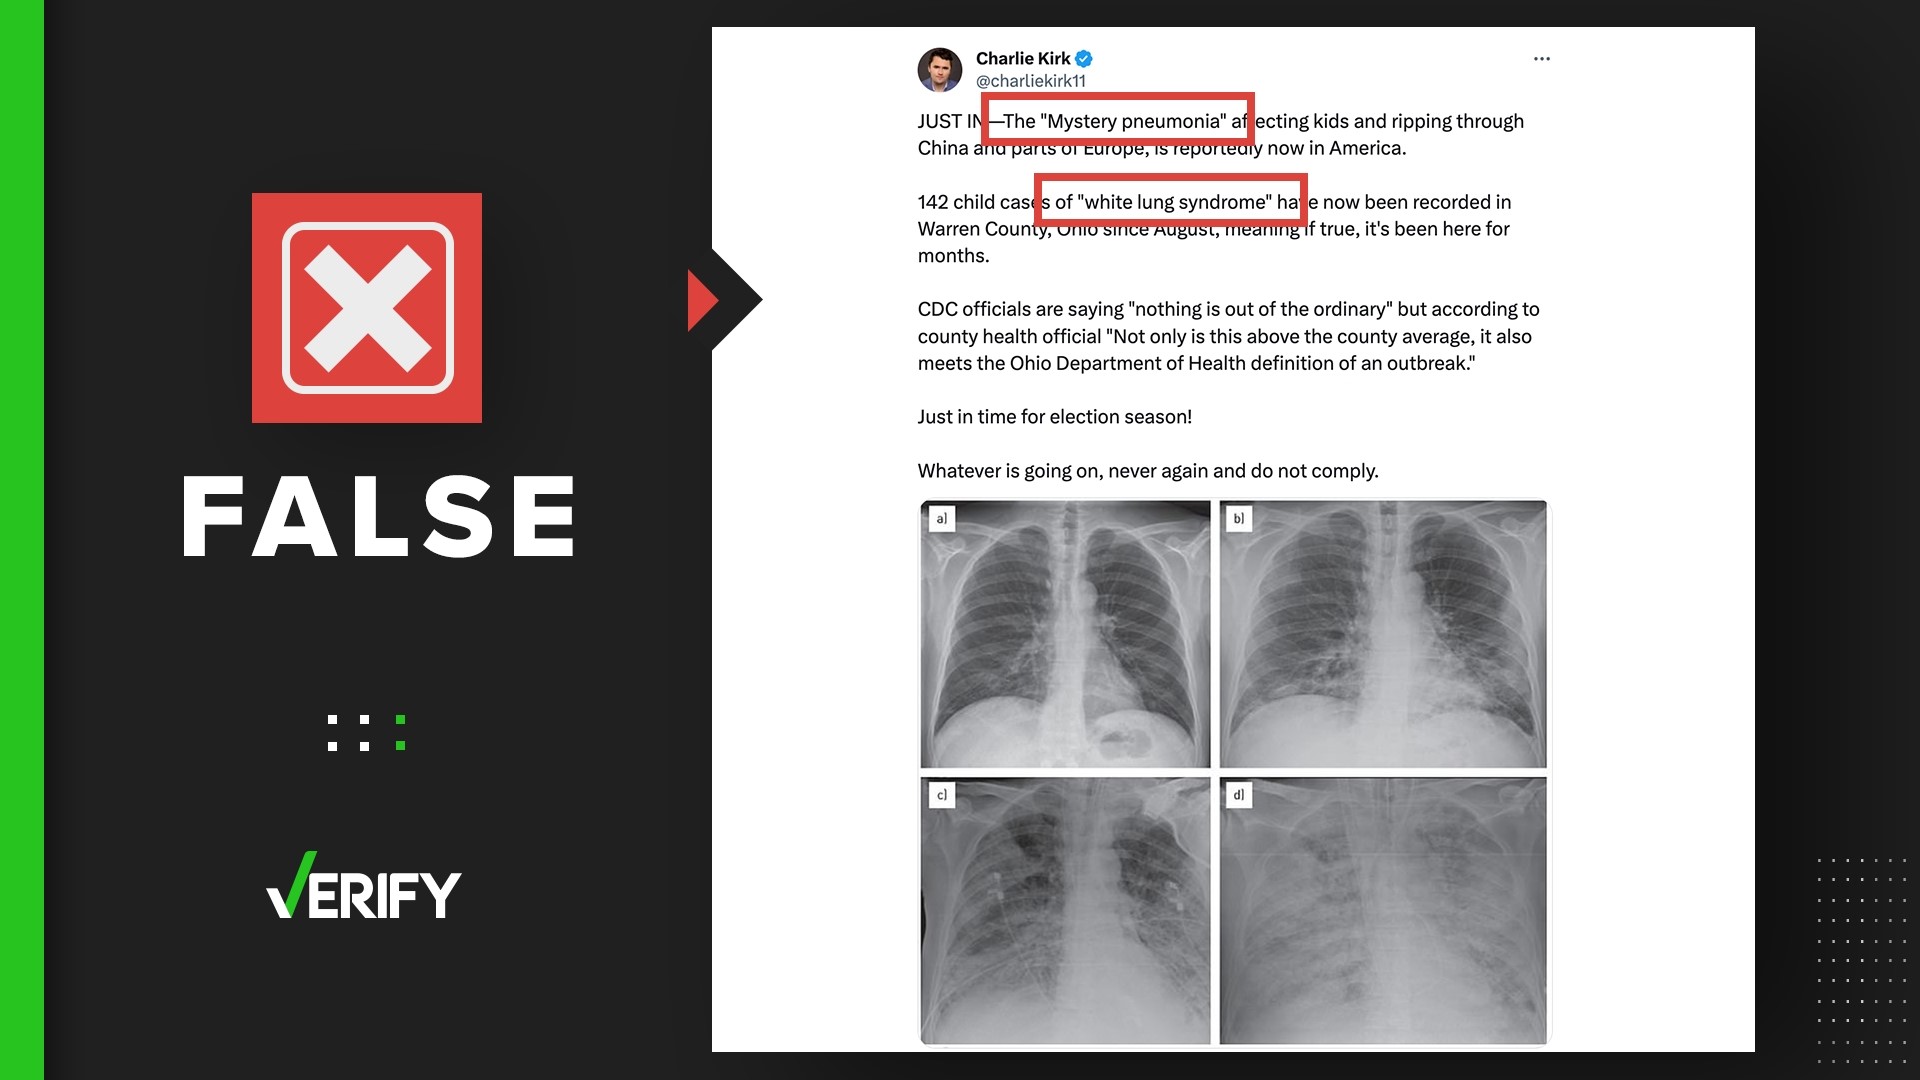 Posts falsely claim a new and mysterious respiratory illness called white lung syndrome is spreading in China and the U.S. Here are the facts.